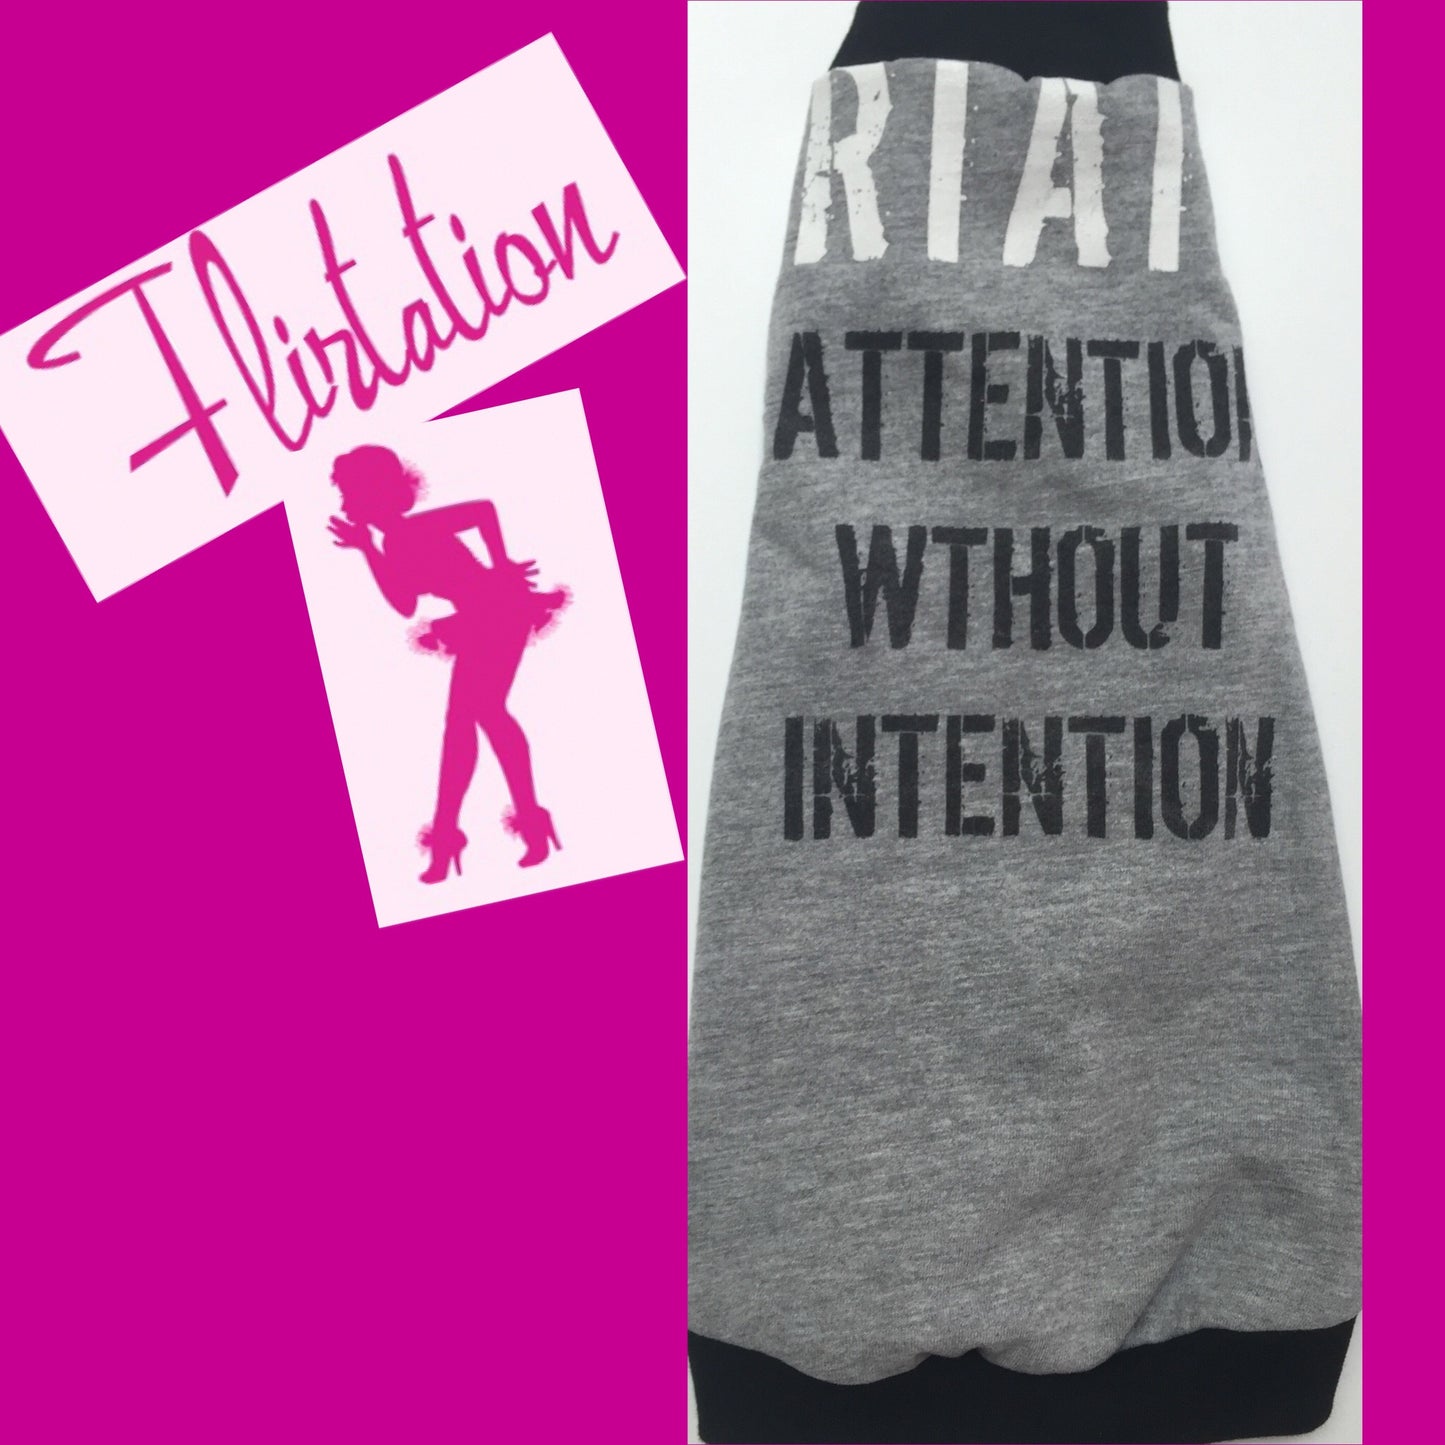 Flirtation: Attention without Intention - Nudie Patooties